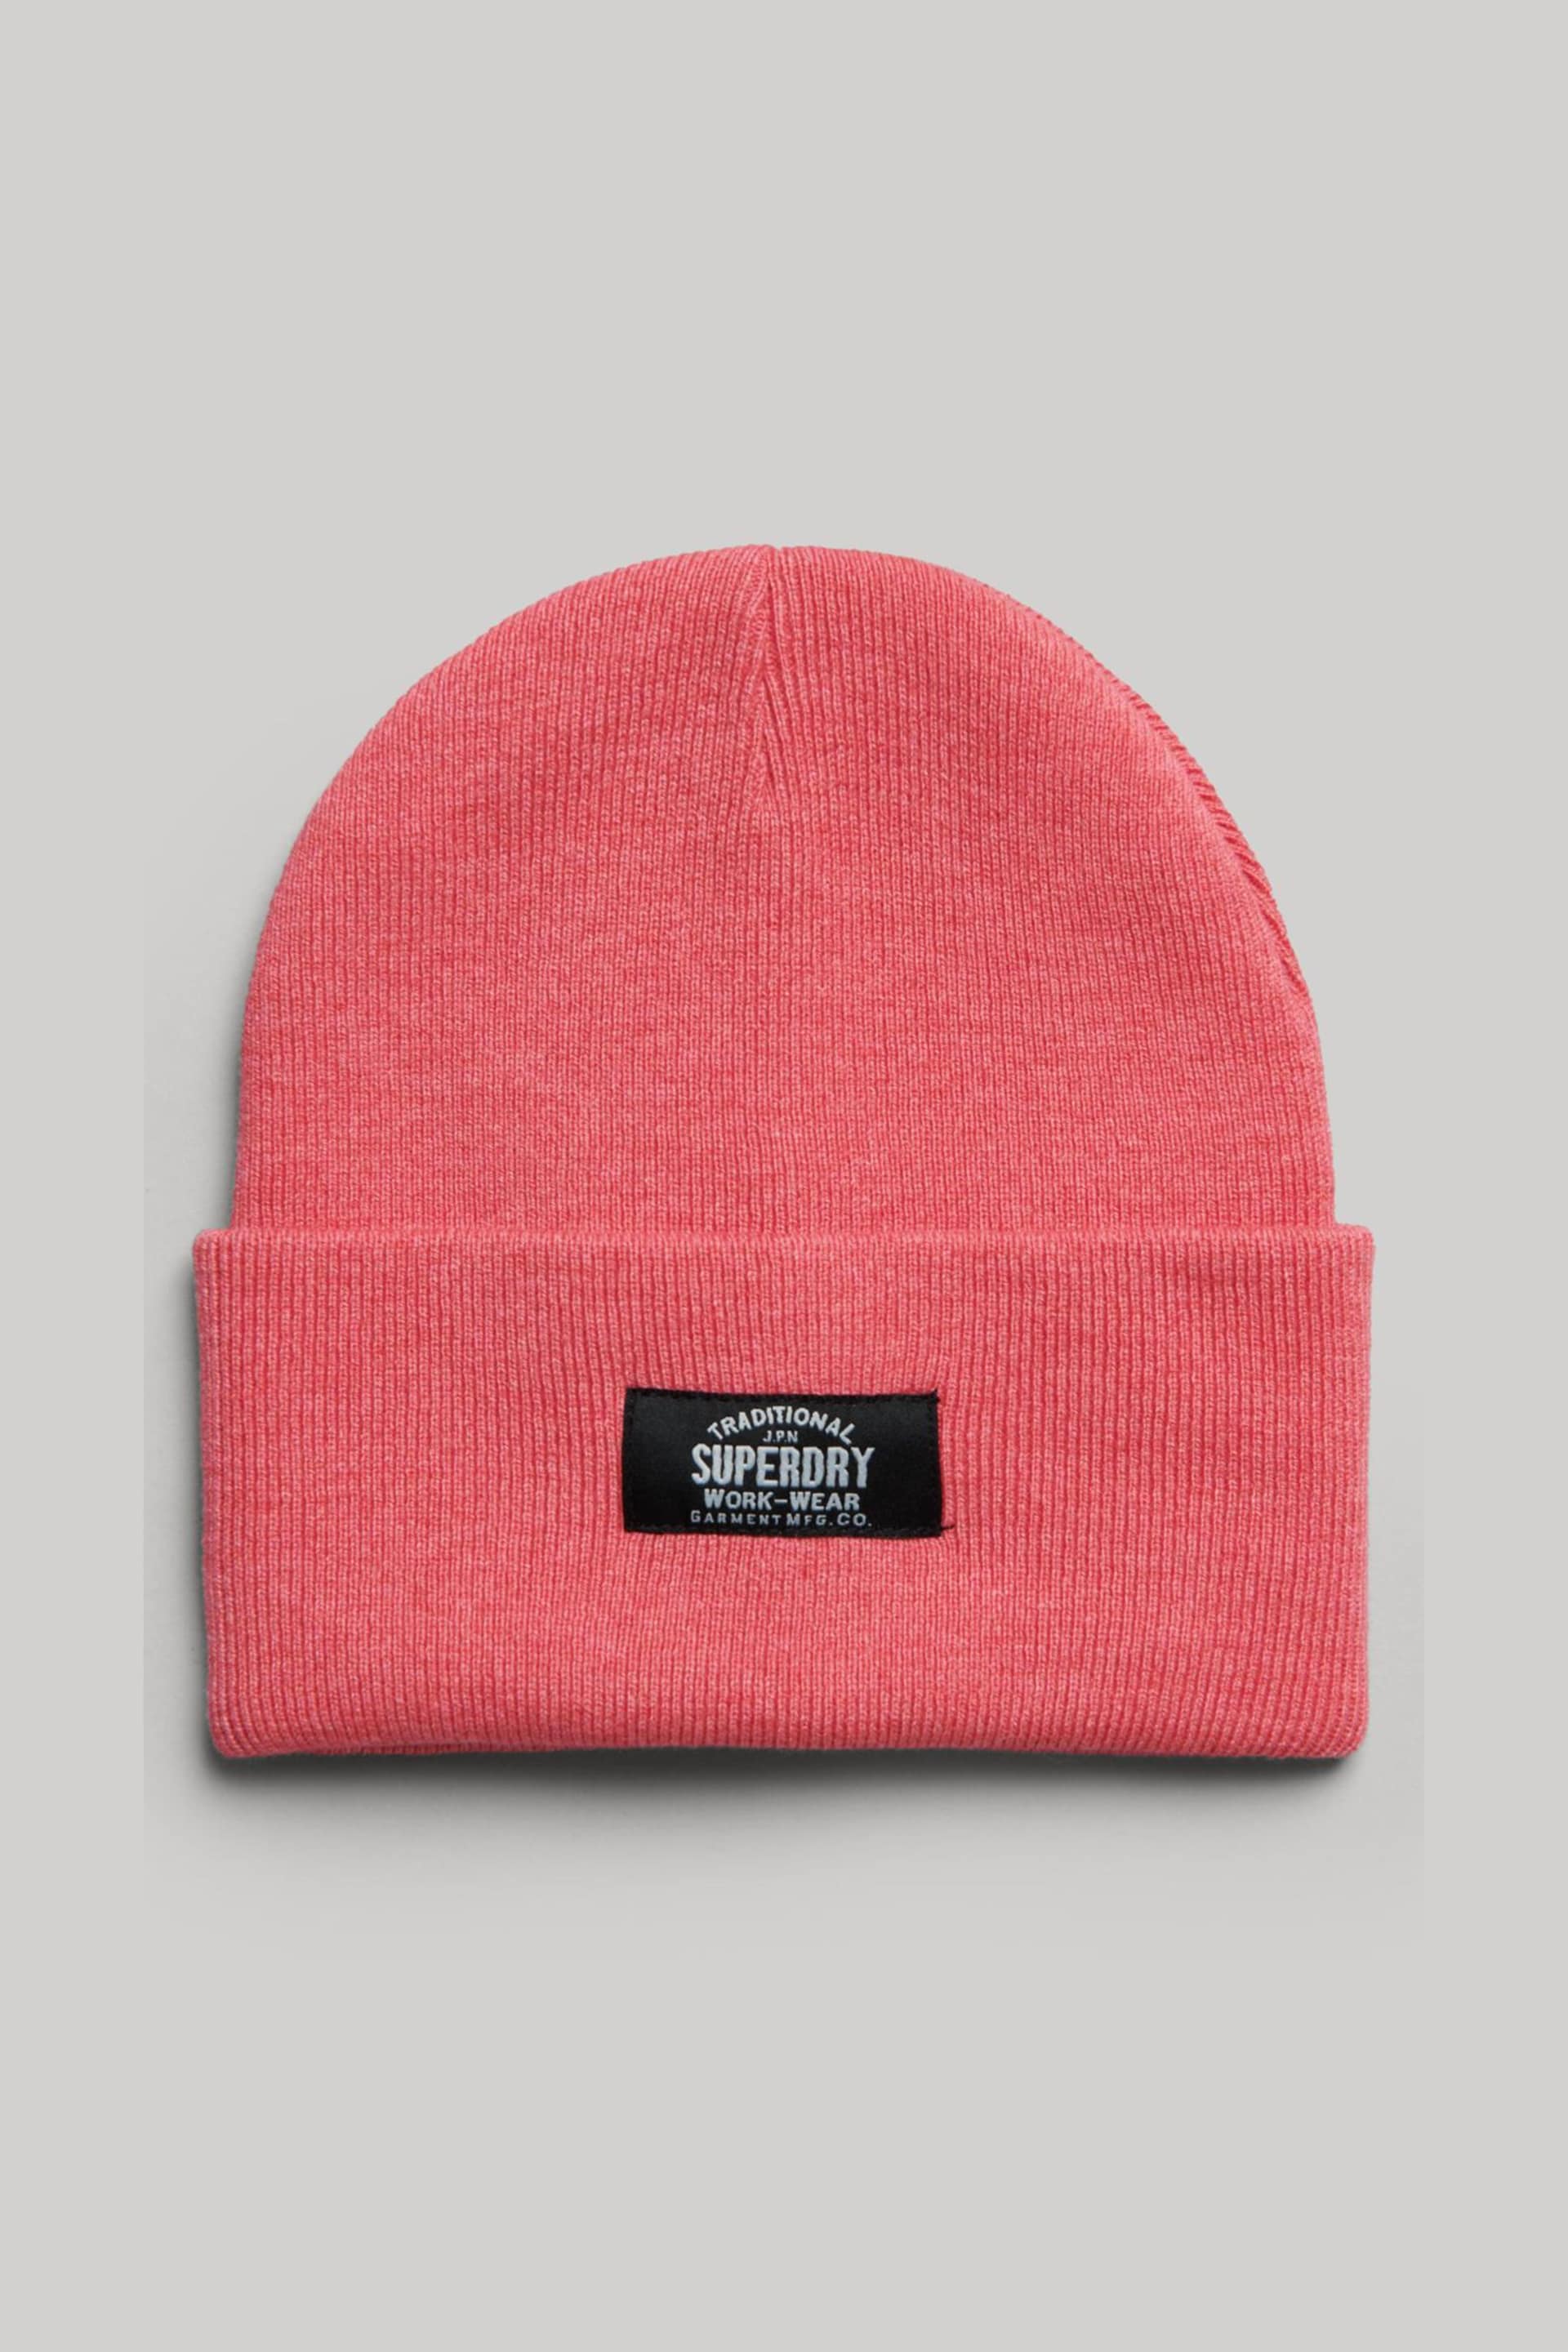 Superdry Pink Classic Knitted Beanie Hat - Image 2 of 3